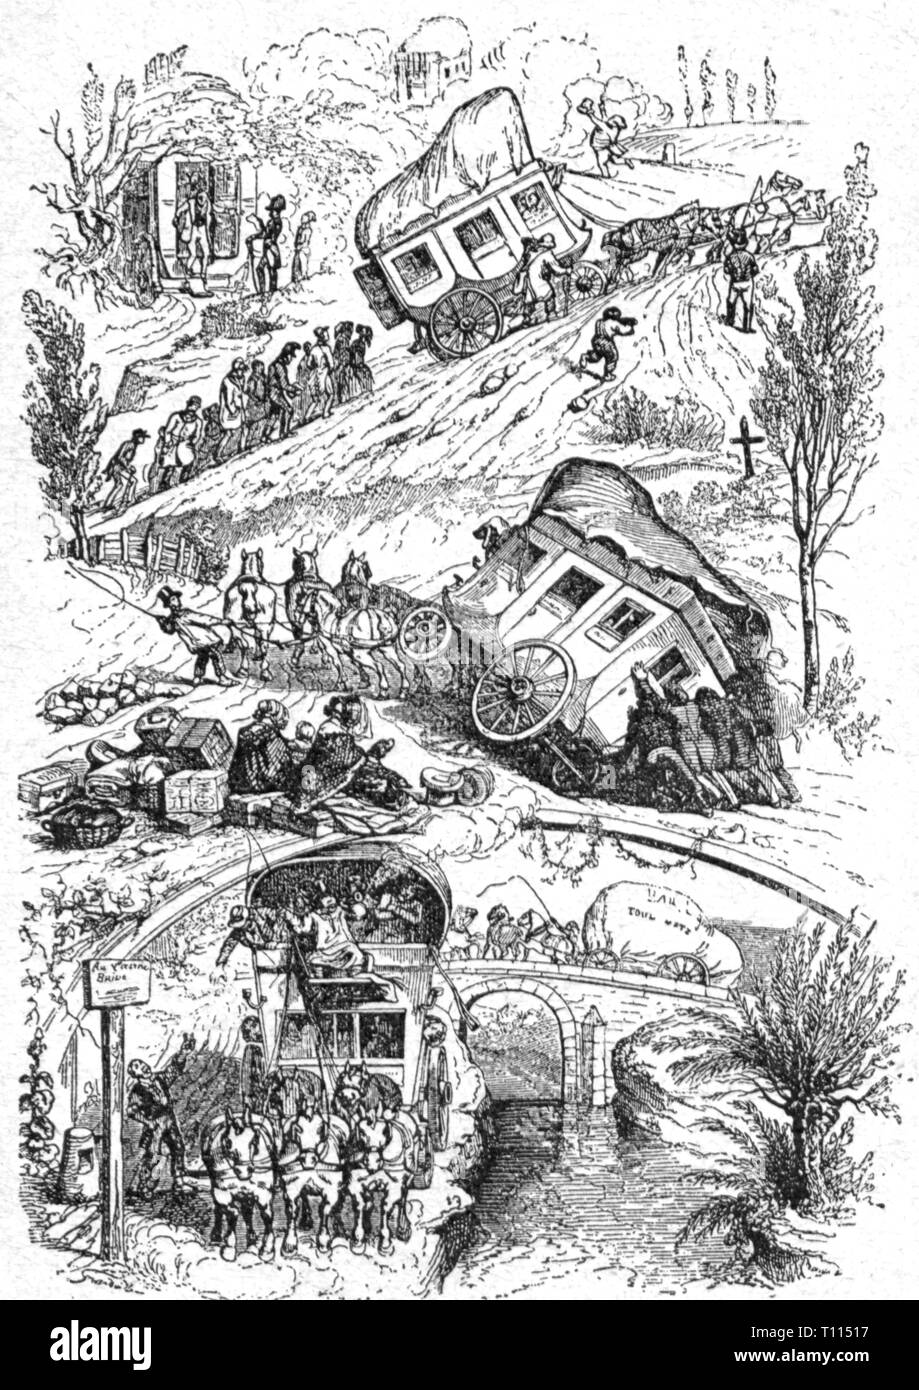 mail, stagecoach, the jeopardies of the stagecoach, wood engraving, after caricature, France, 1st half 19th century, crash, crashes, accident, accidents, danger, dangers, steep road, walking, walk, pushing, shove, shoving, mountains, mountain, satire, cartoon, cartoons, passengers, passenger, coach, carriage, coaches, carriages, transport, transportation, roads, people, horse, horses, mail, post, jeopardy, jeopardies, stagecoach, stagecoaches, caricature, caricatures, historic, historical, Additional-Rights-Clearance-Info-Not-Available Stock Photo